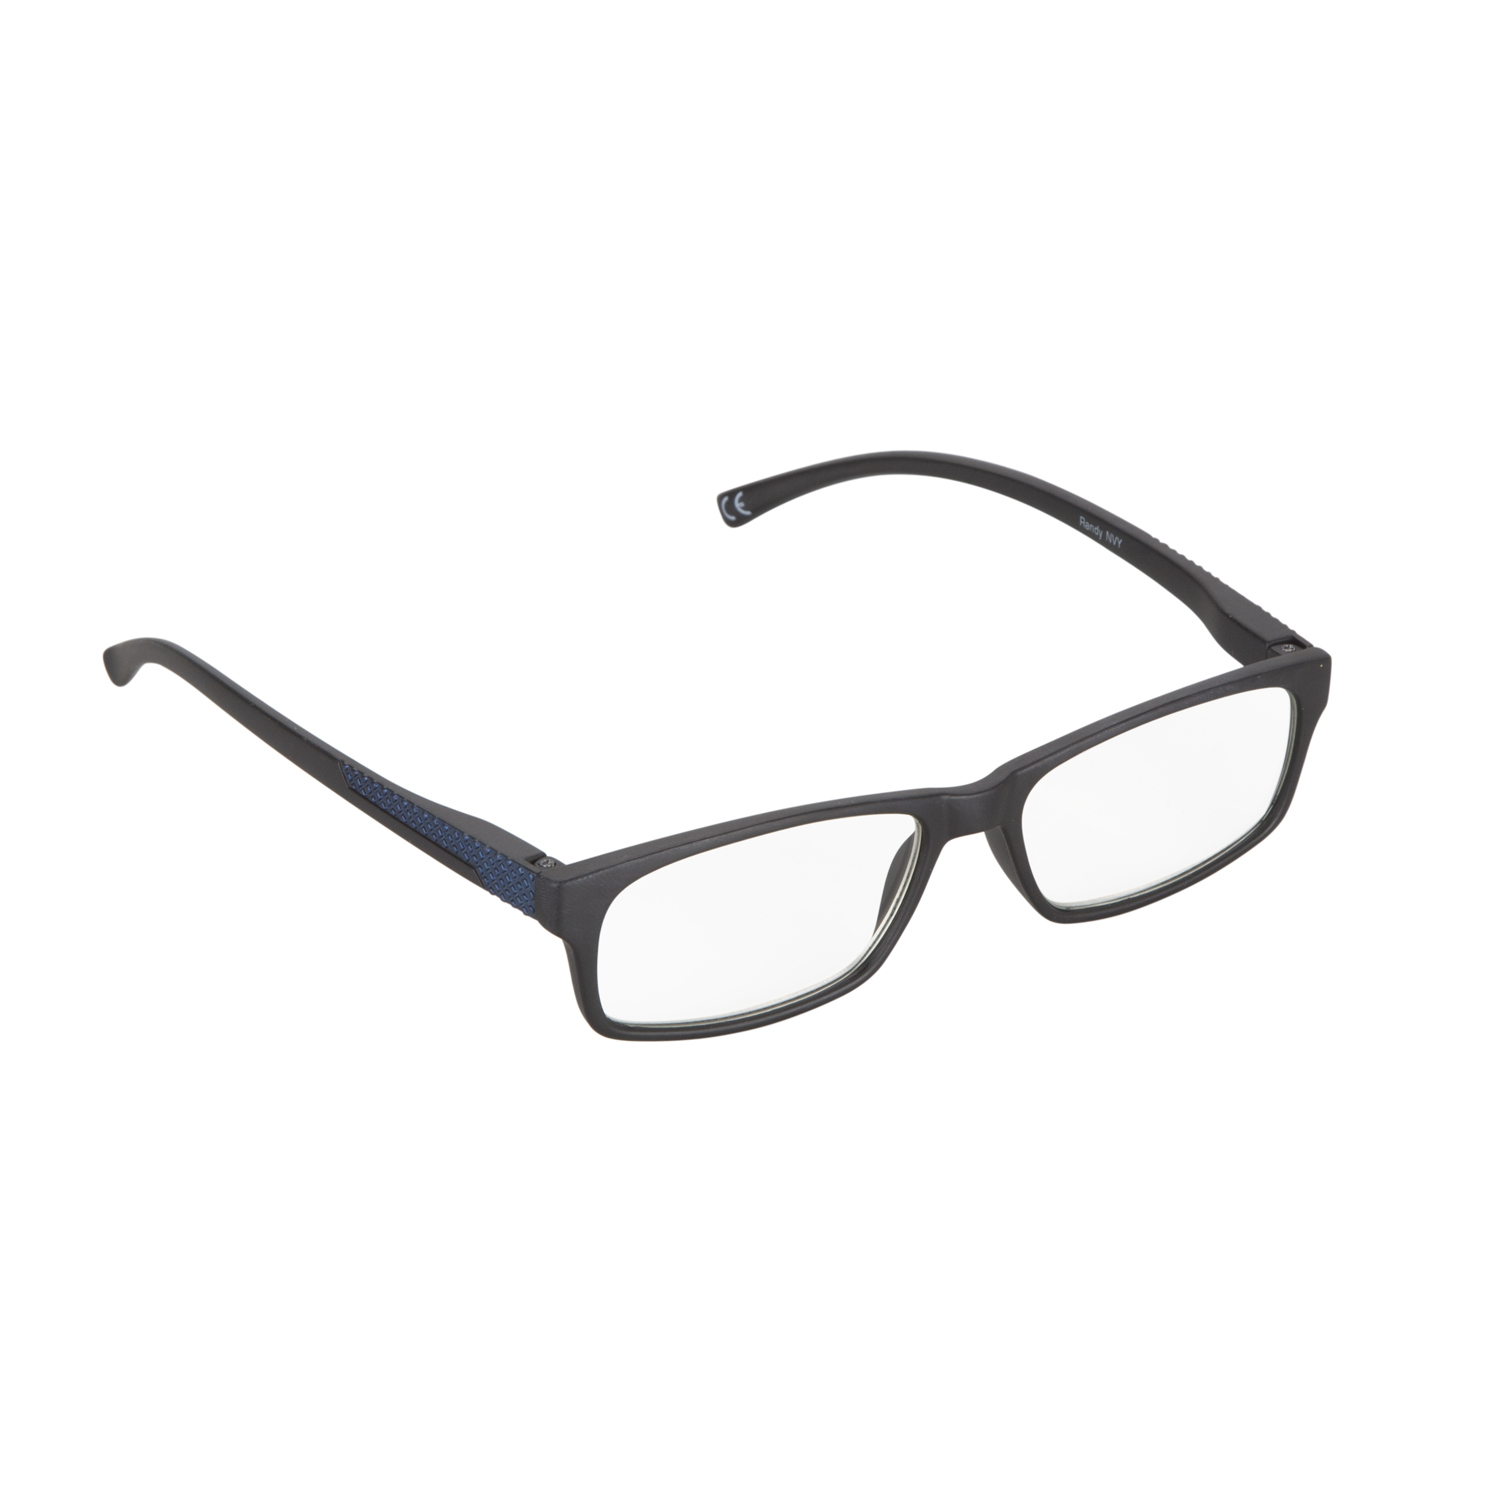 Randy Magnivision Reading Glass - 3.50 Image 1